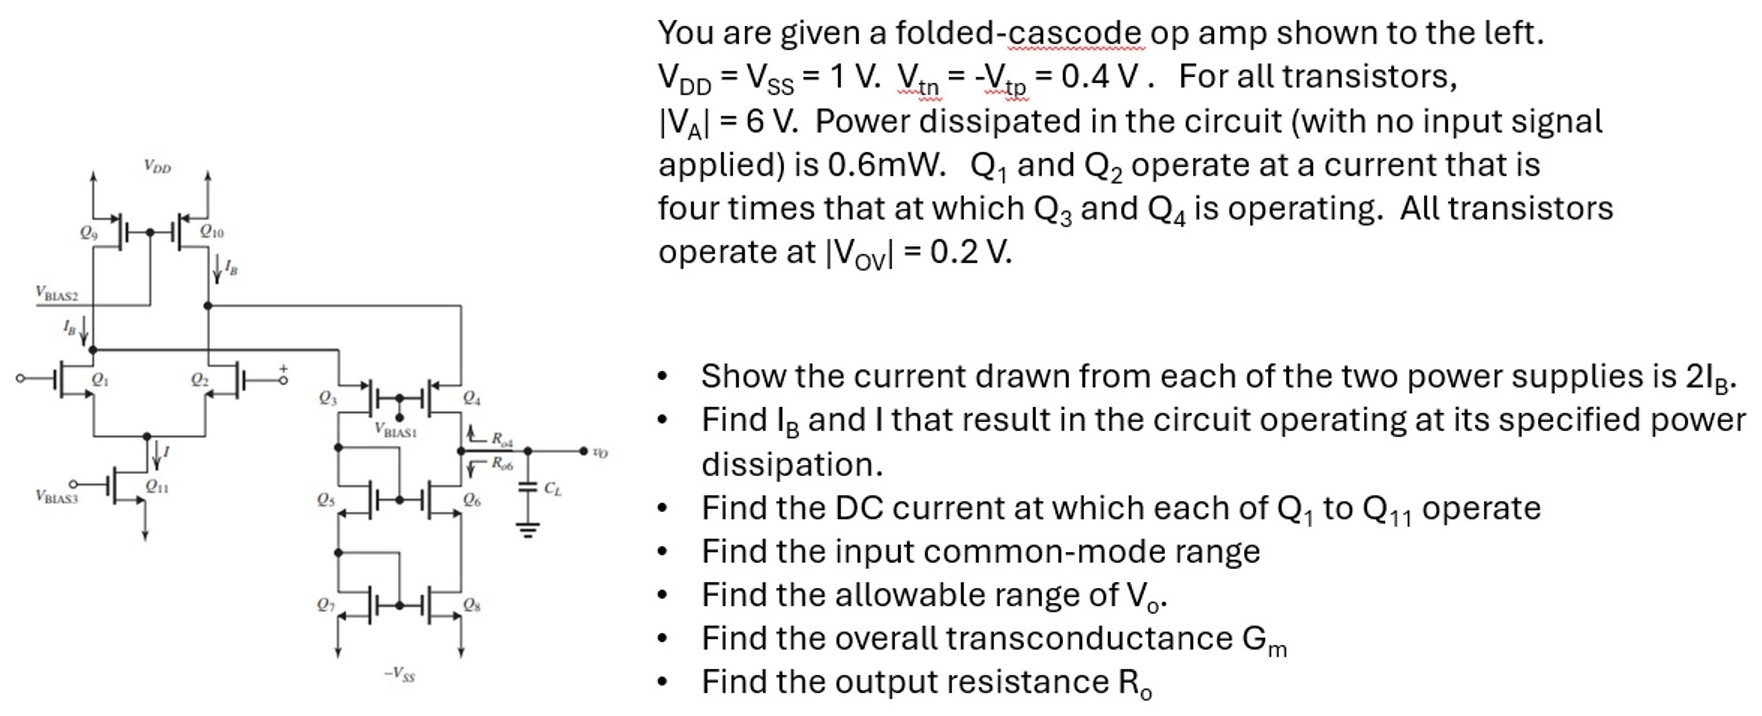 You are given a folded-cascode op amp shown to the left. VDD = VSS = 1 V. Vtn = −Vtp = 0.4 V. For all transistors, |VA| = 6 V. Power dissipated in the circuit (with no input signal applied) is 0.6 mW. Q1 and Q2 operate at a current that is four times that at which Q3 and Q4 is operating. All transistors operate at |VOV| = 0.2V. Show the current drawn from each of the two power supplies is 2IB. Find IB and I that result in the circuit operating at its specified power dissipation. Find the DC current at which each of Q1 to Q11 operate Find the input common-mode range Find the allowable range of Vo. Find the overall transconductance Gm Find the output resistance R0